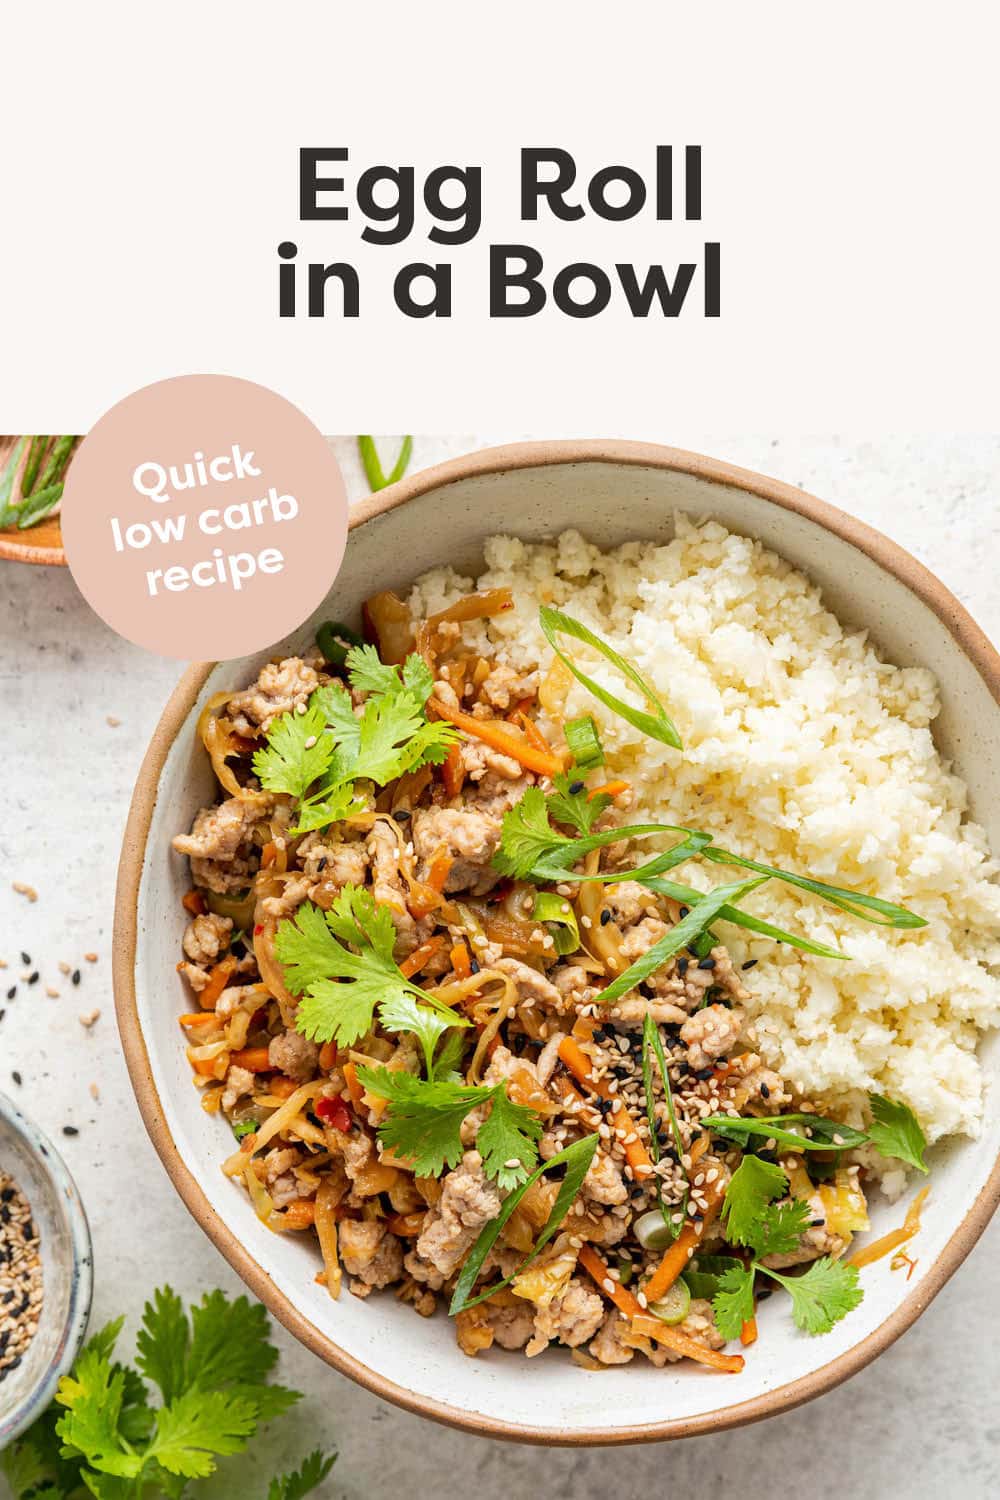 Egg Roll in a Bowl {Easy + Low-Carb} - Eating Bird Food